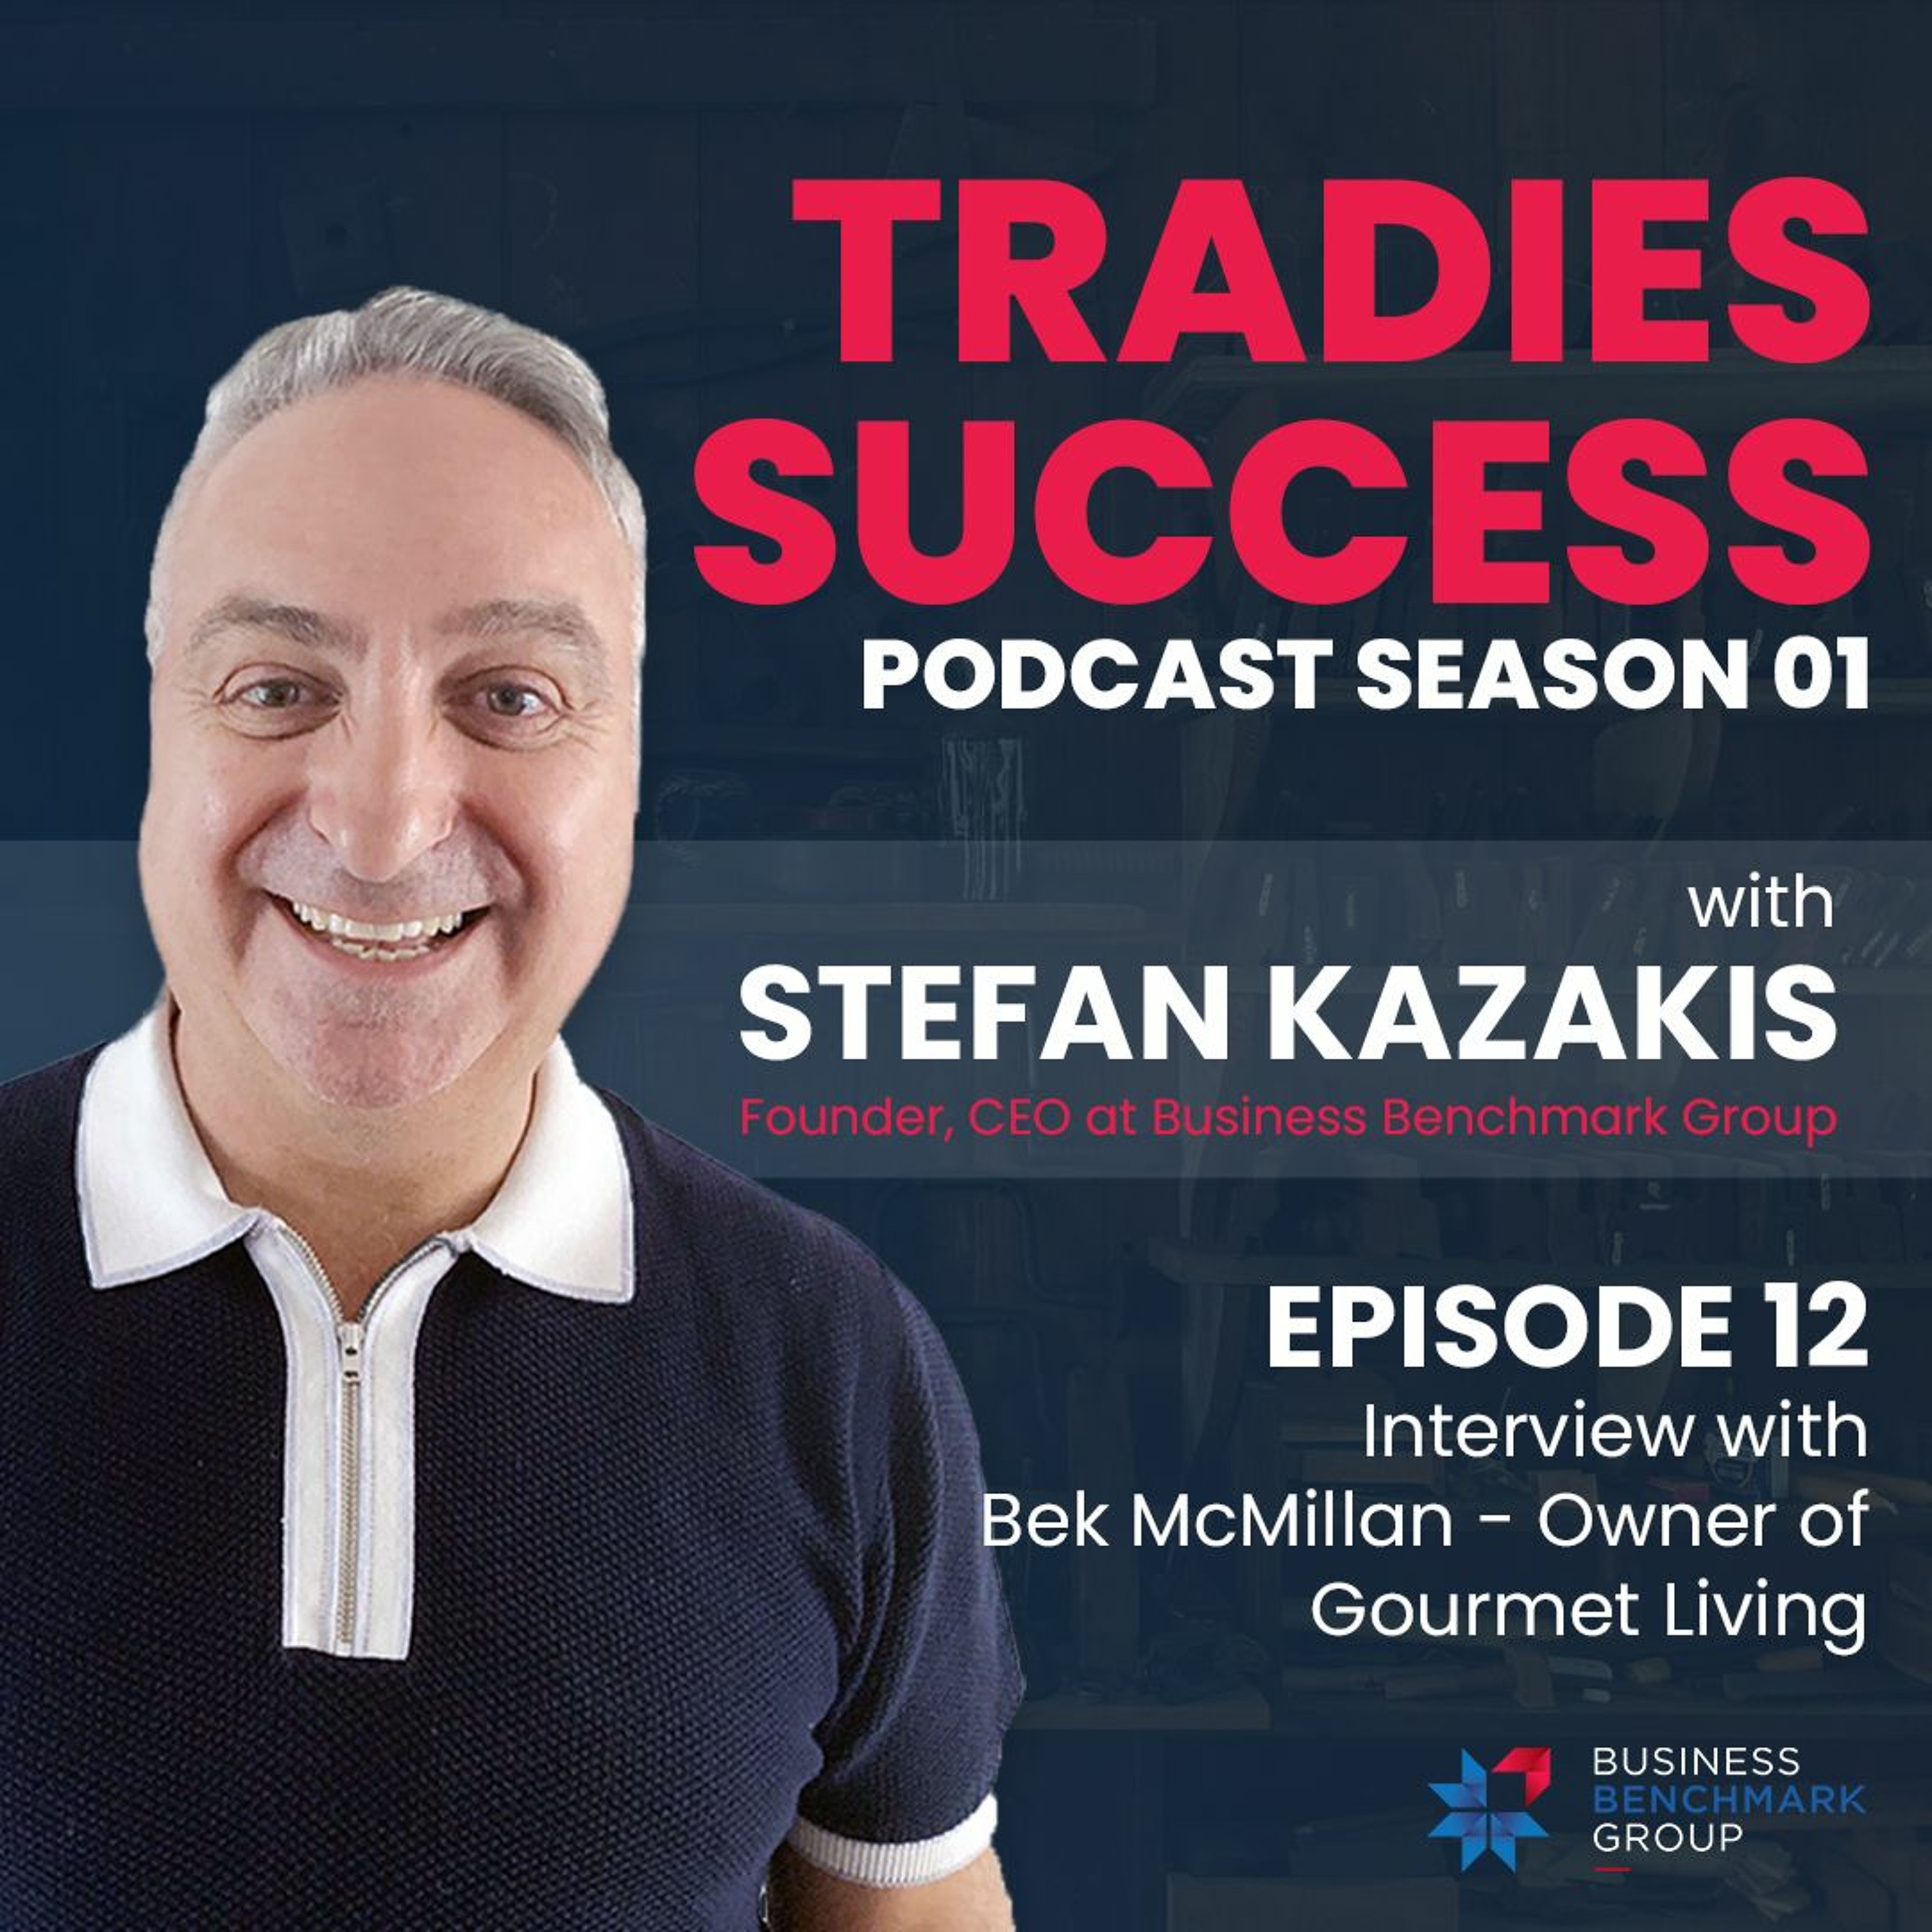 Interview with Bek McMillian - Gourmet Living Owner | Tradies Success S01, EP12